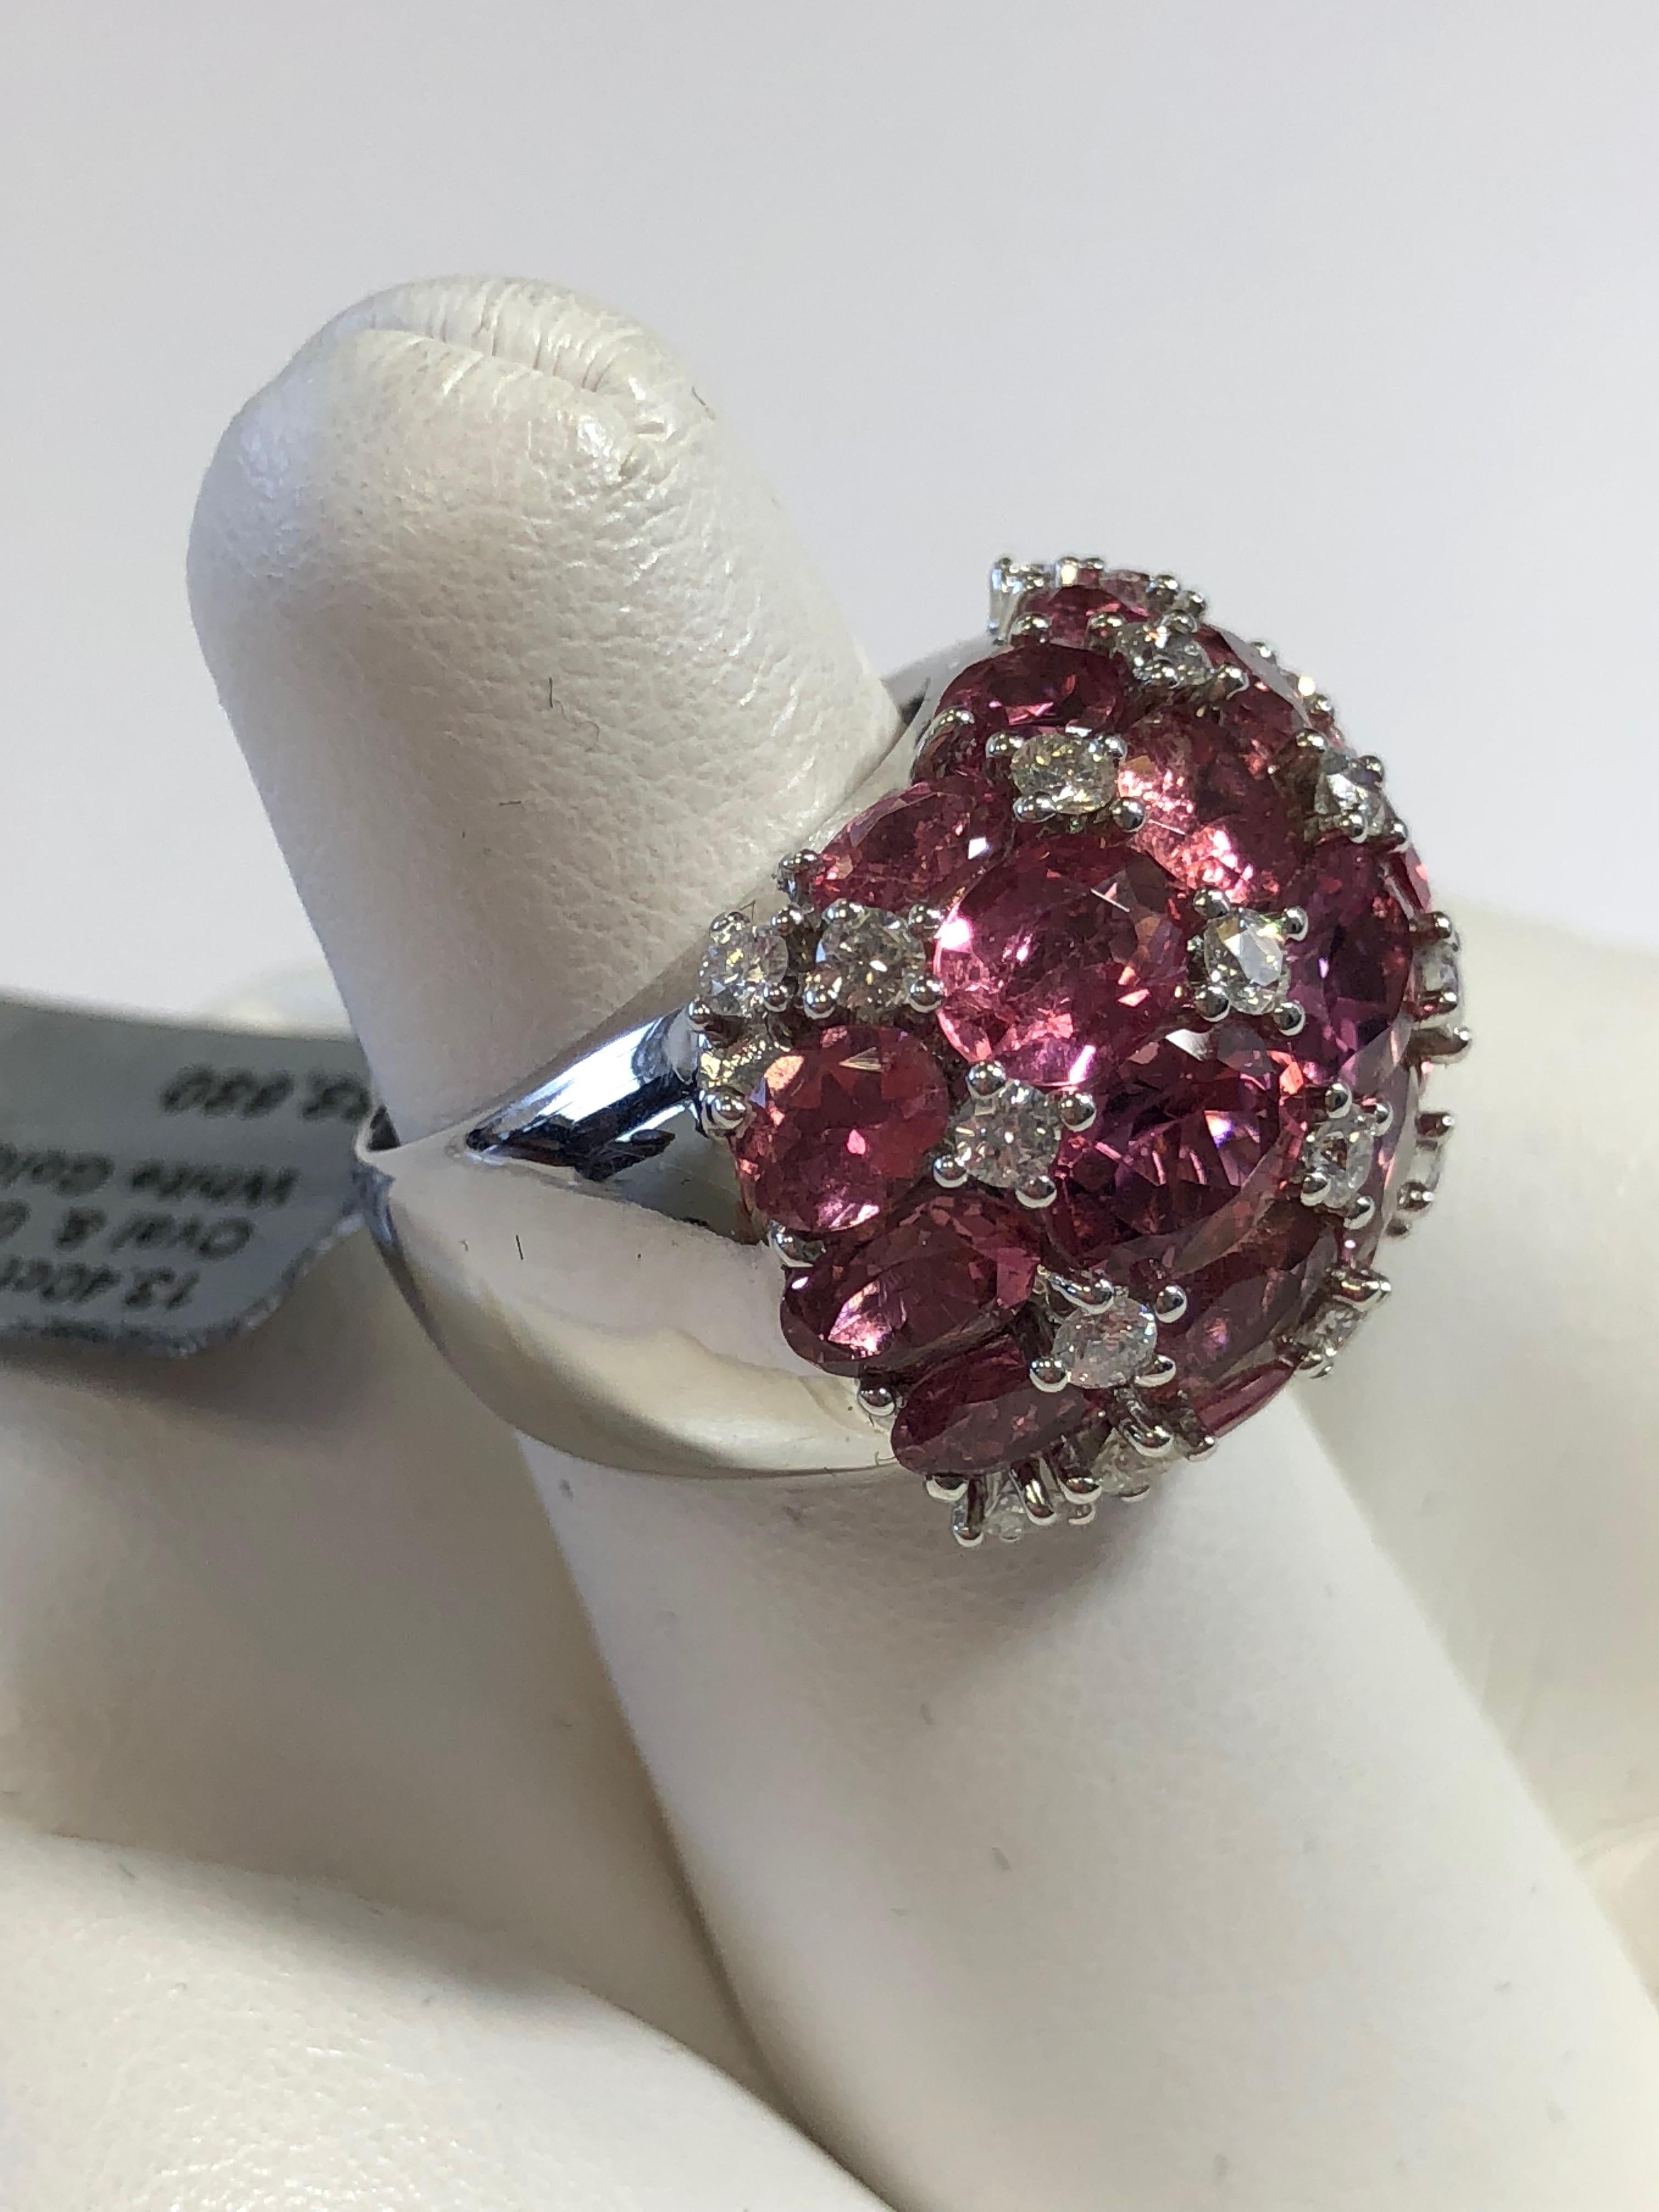 Gorgeous 13.40 carats of bright pink tourmaline ovals in different hues of pink with white diamond accents weighing 0.93 carats.  This beautiful 18k white gold ring is a size 6.25.  Perfect for any occasion!